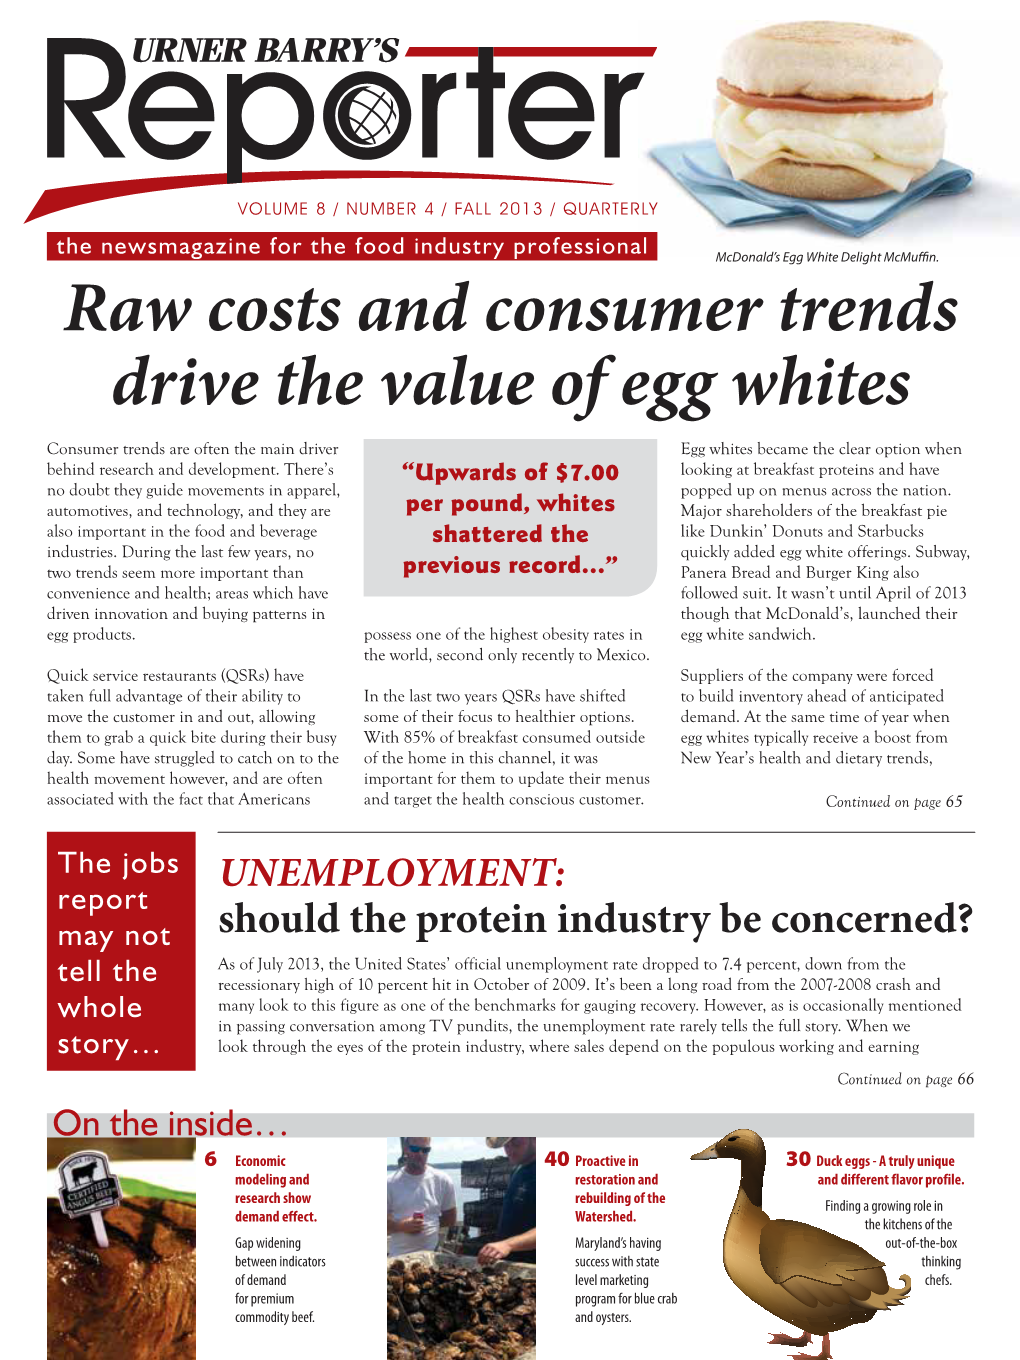 Raw Costs and Consumer Trends Drive the Value of Egg Whites